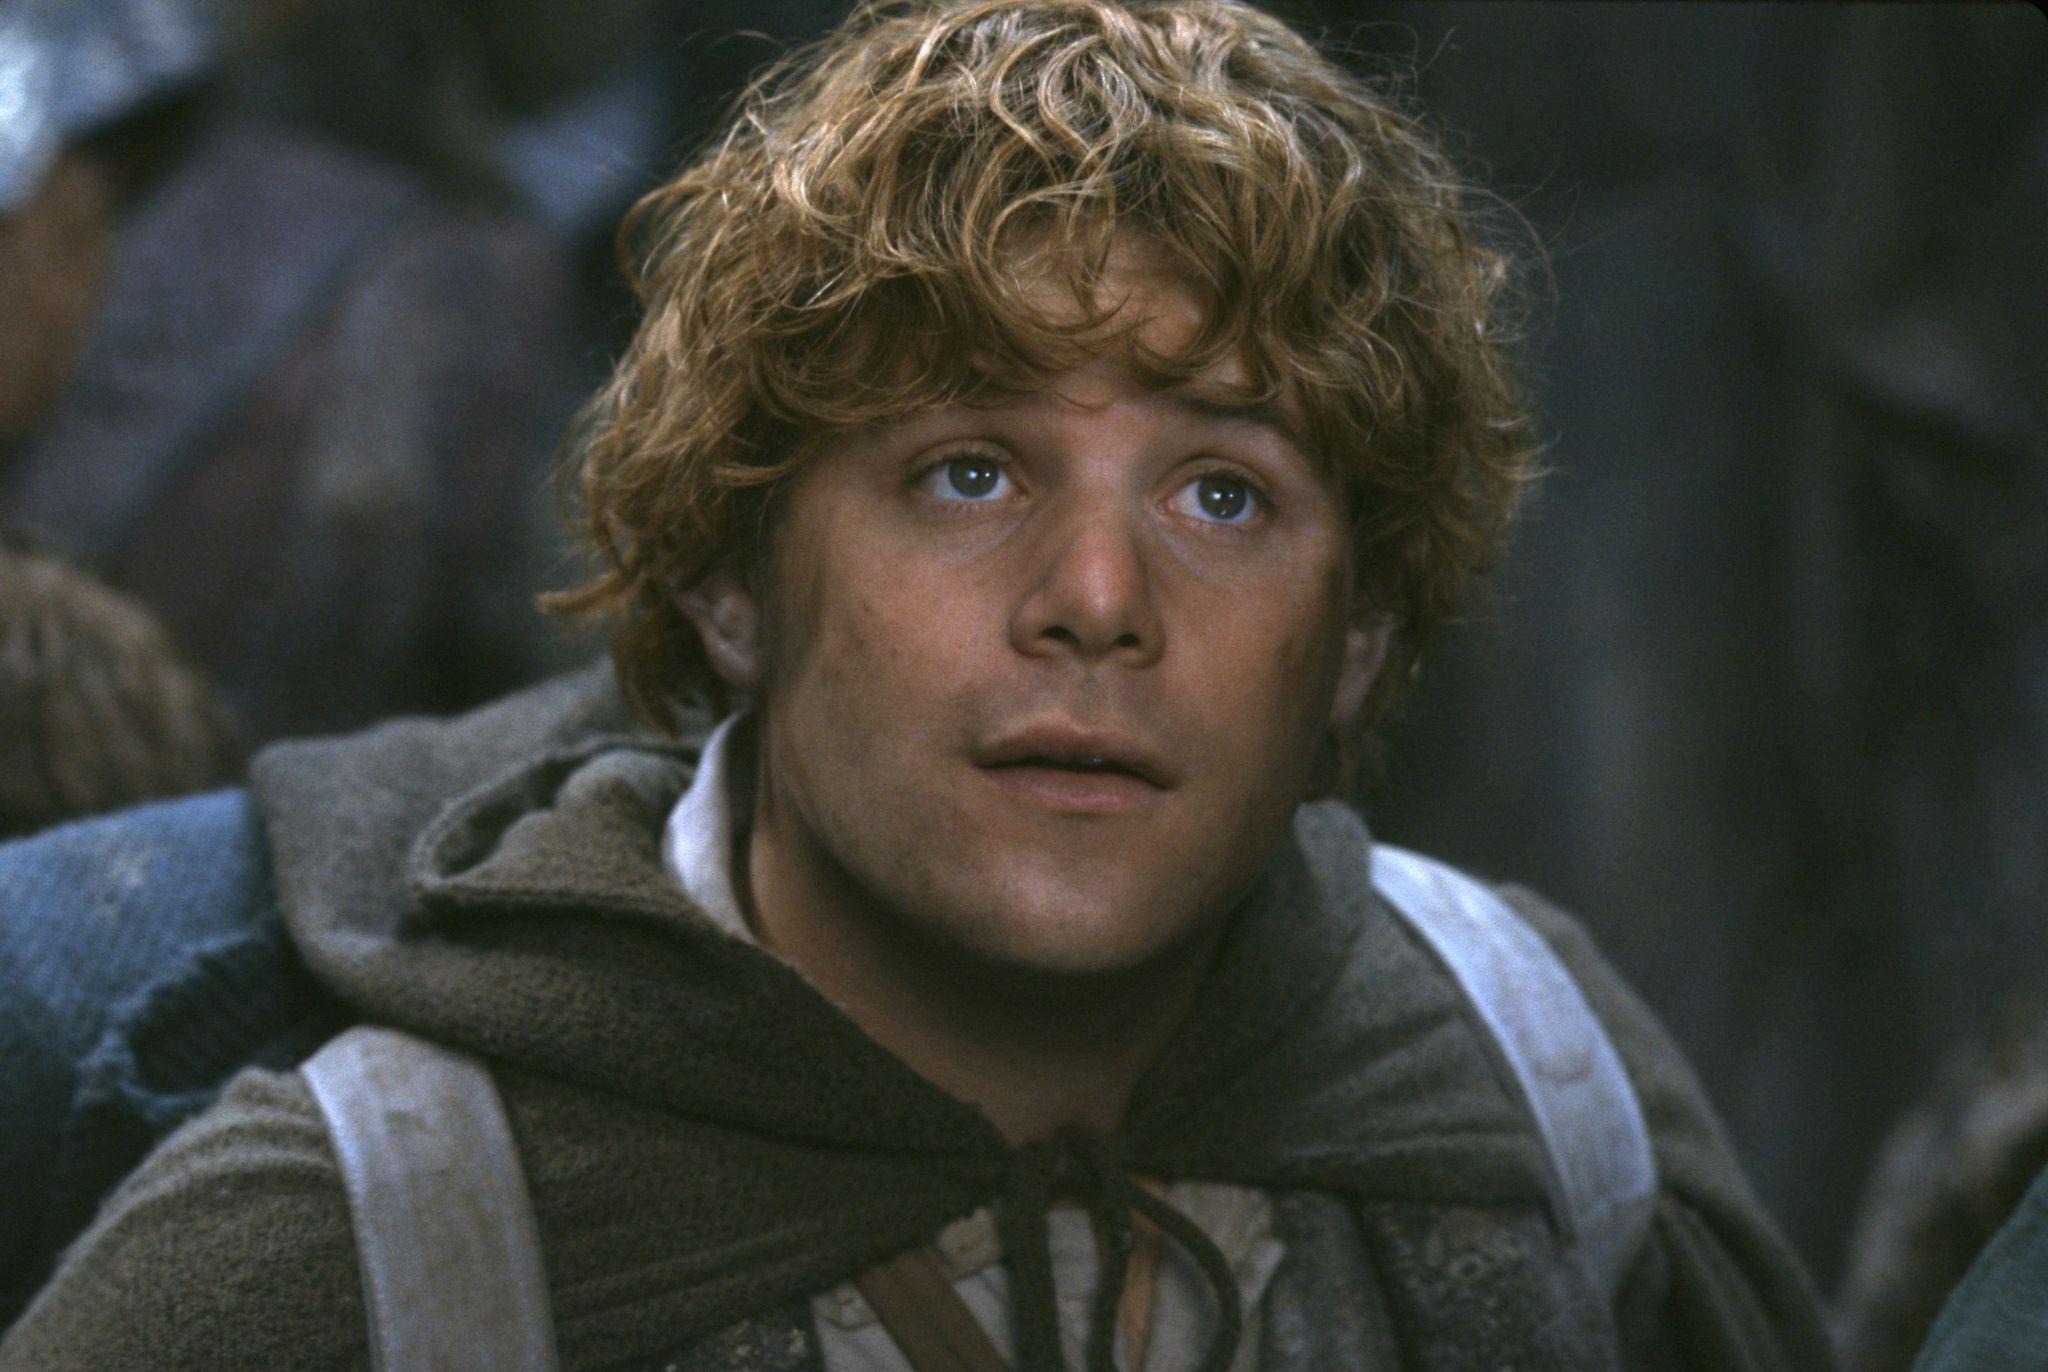 picture-of-sean-astin-in-the-lord-of-the-rings-the-fellowship-of-the-ring-large-picture